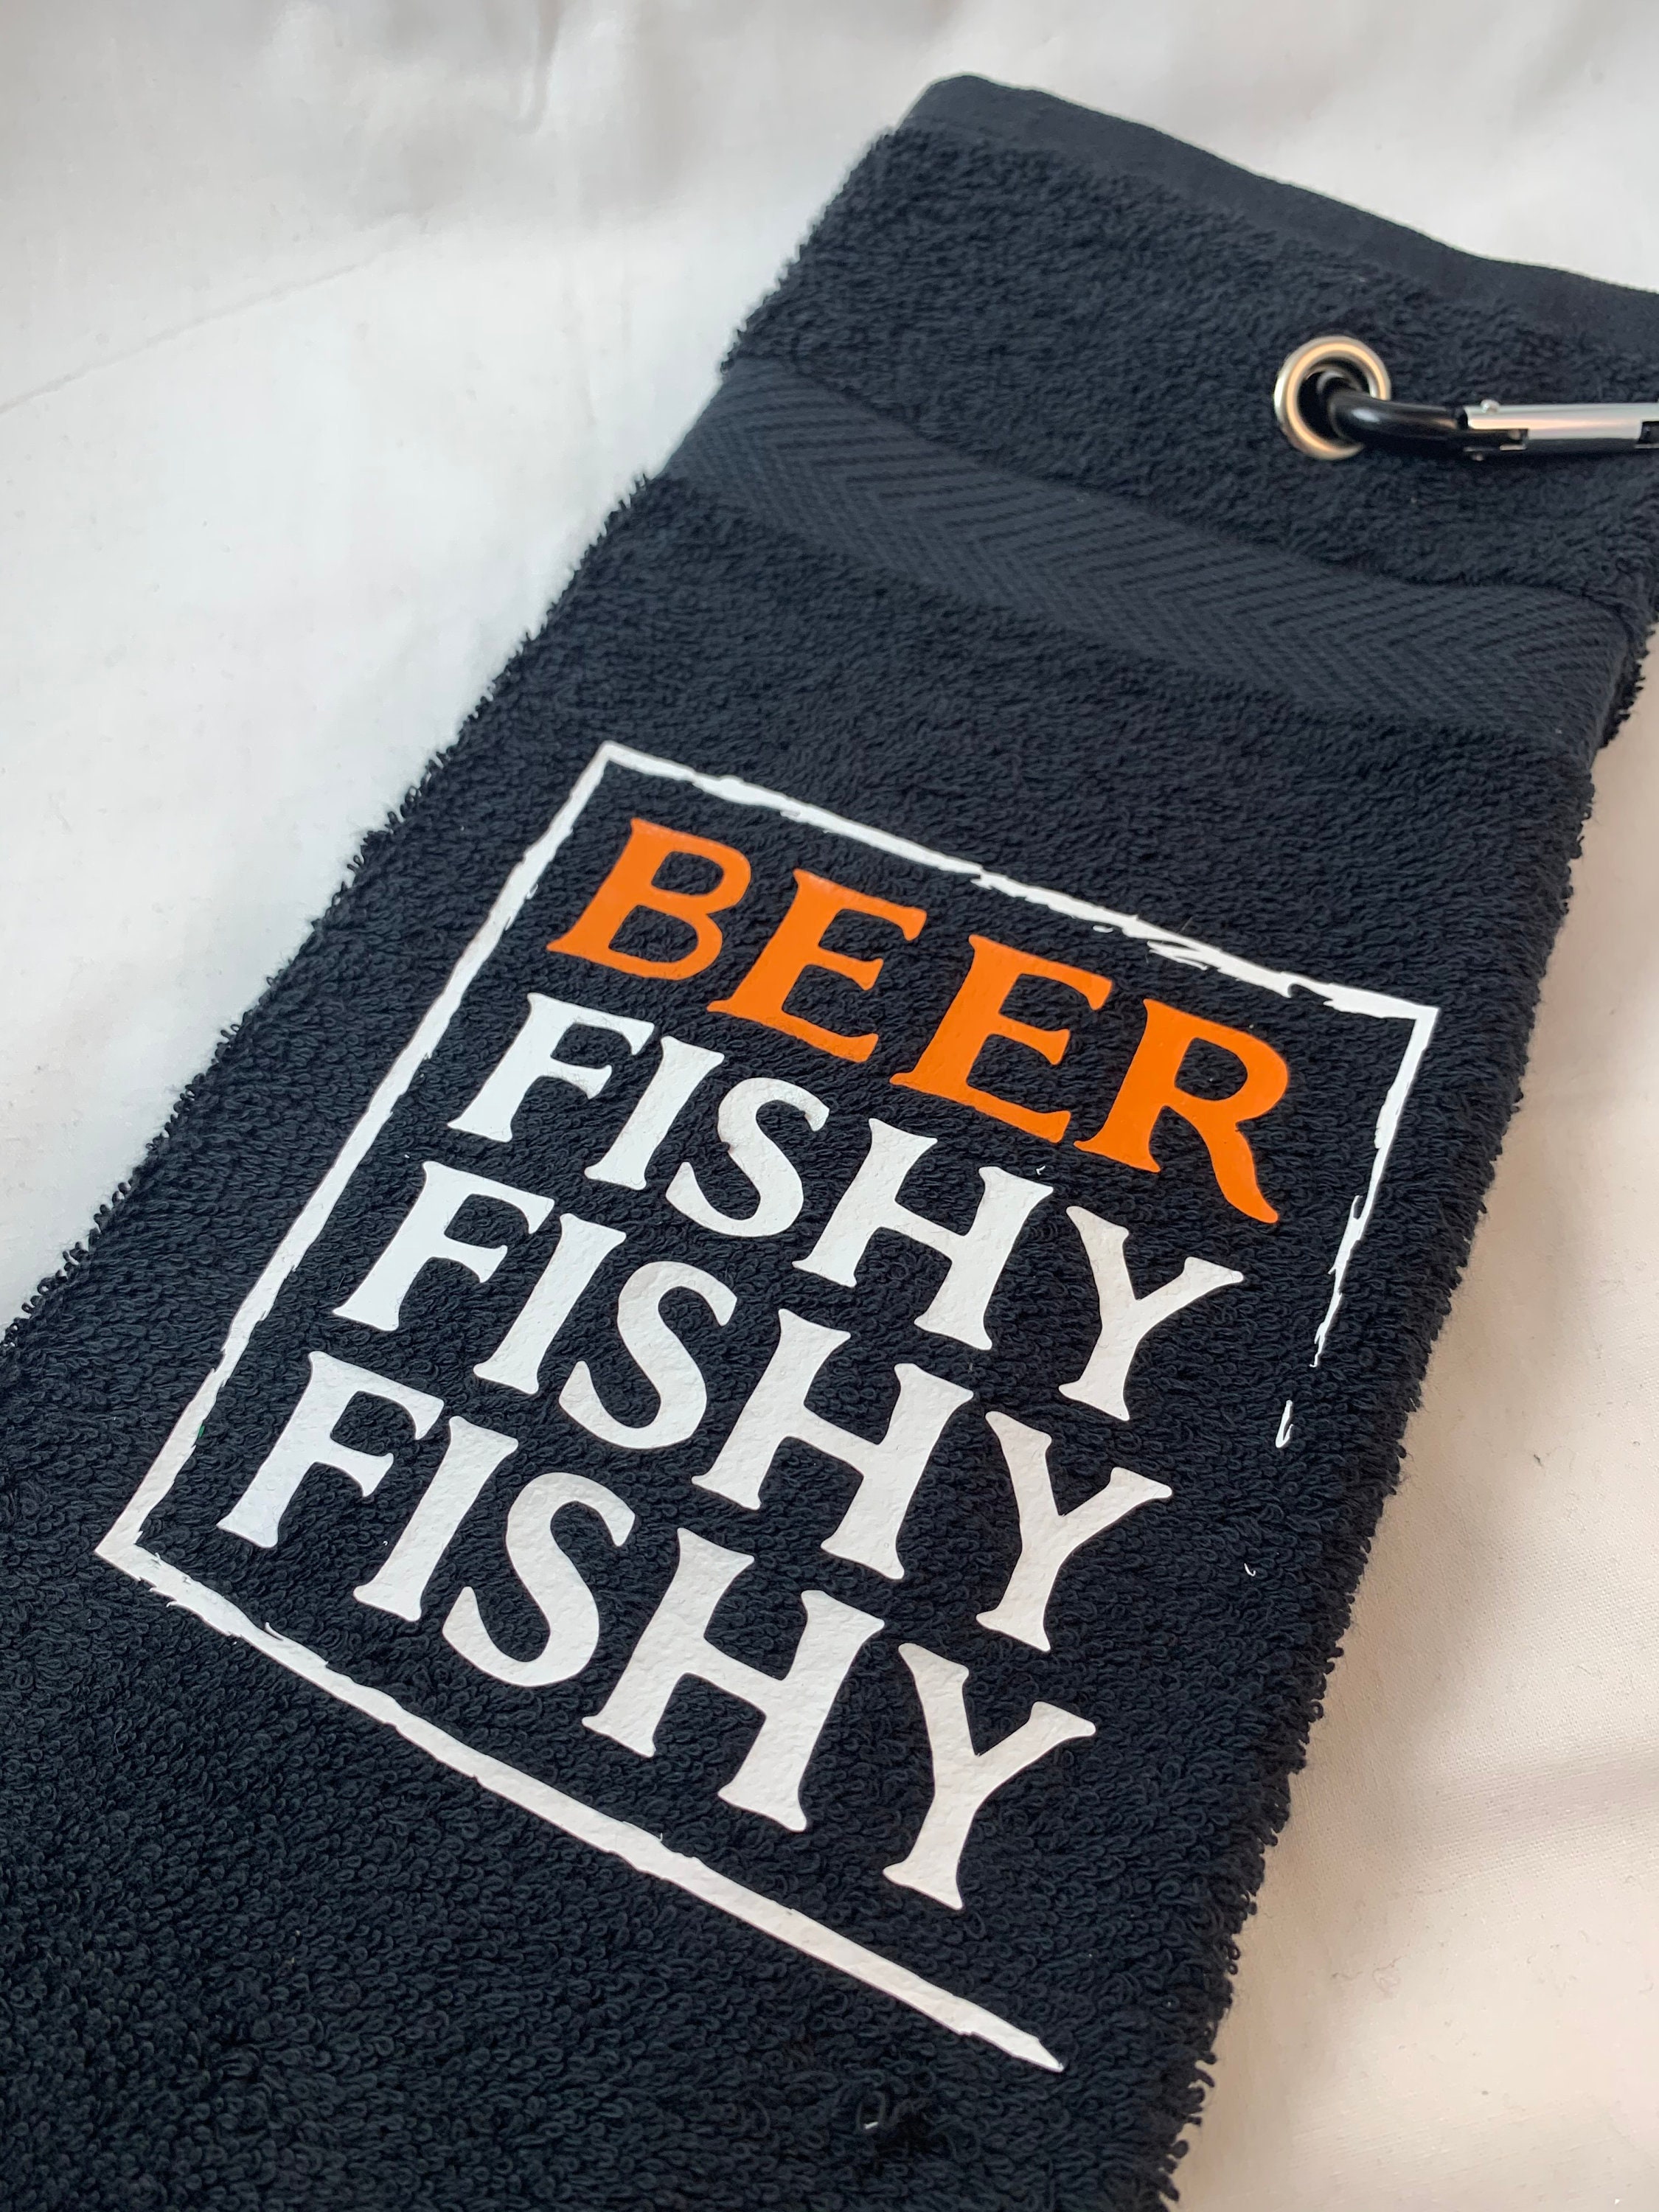 Beer fishing towel, black fishing towel with hanger, funny fishing towel.  Great Father's Day or cabin warming gift. Gift for boat